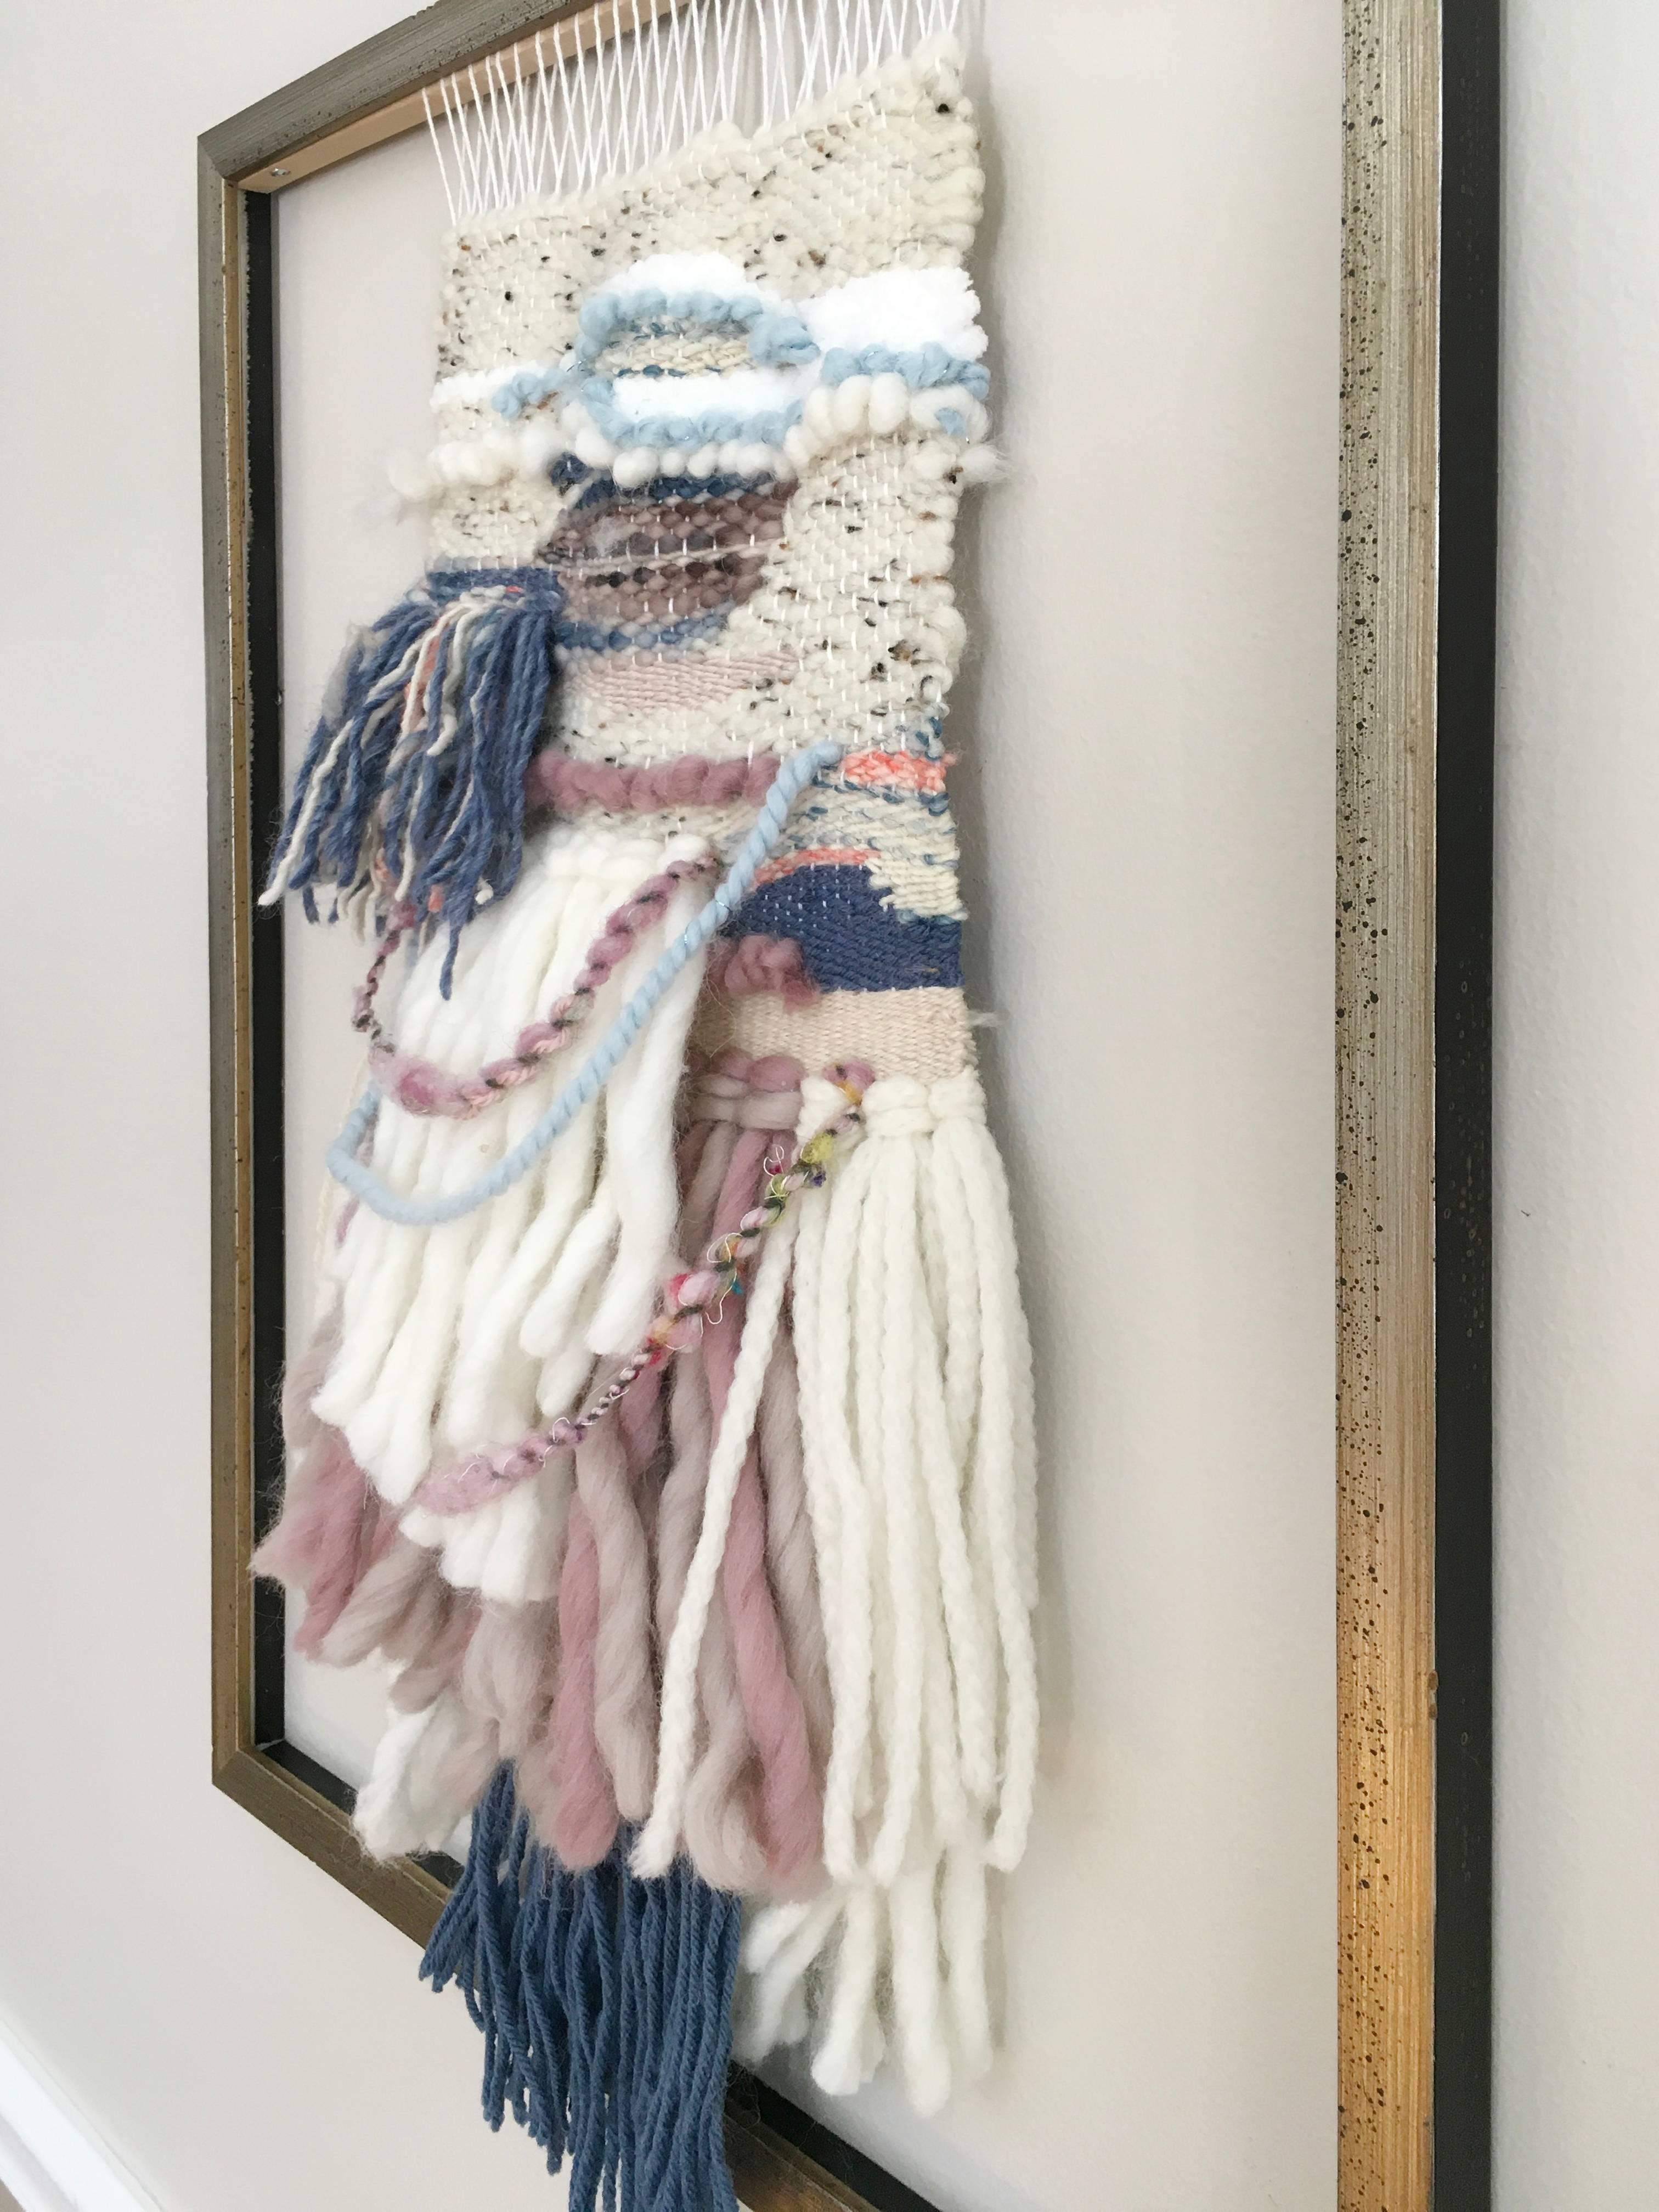 This fiber weaving by Dolores Tema is made with cotton and Merino and Alpaca wool. The weaving is framed in a distressed warm champagne frame, and is woven from the top downward, with varying colors of muted pink, beige, creme, and pink yawns woven